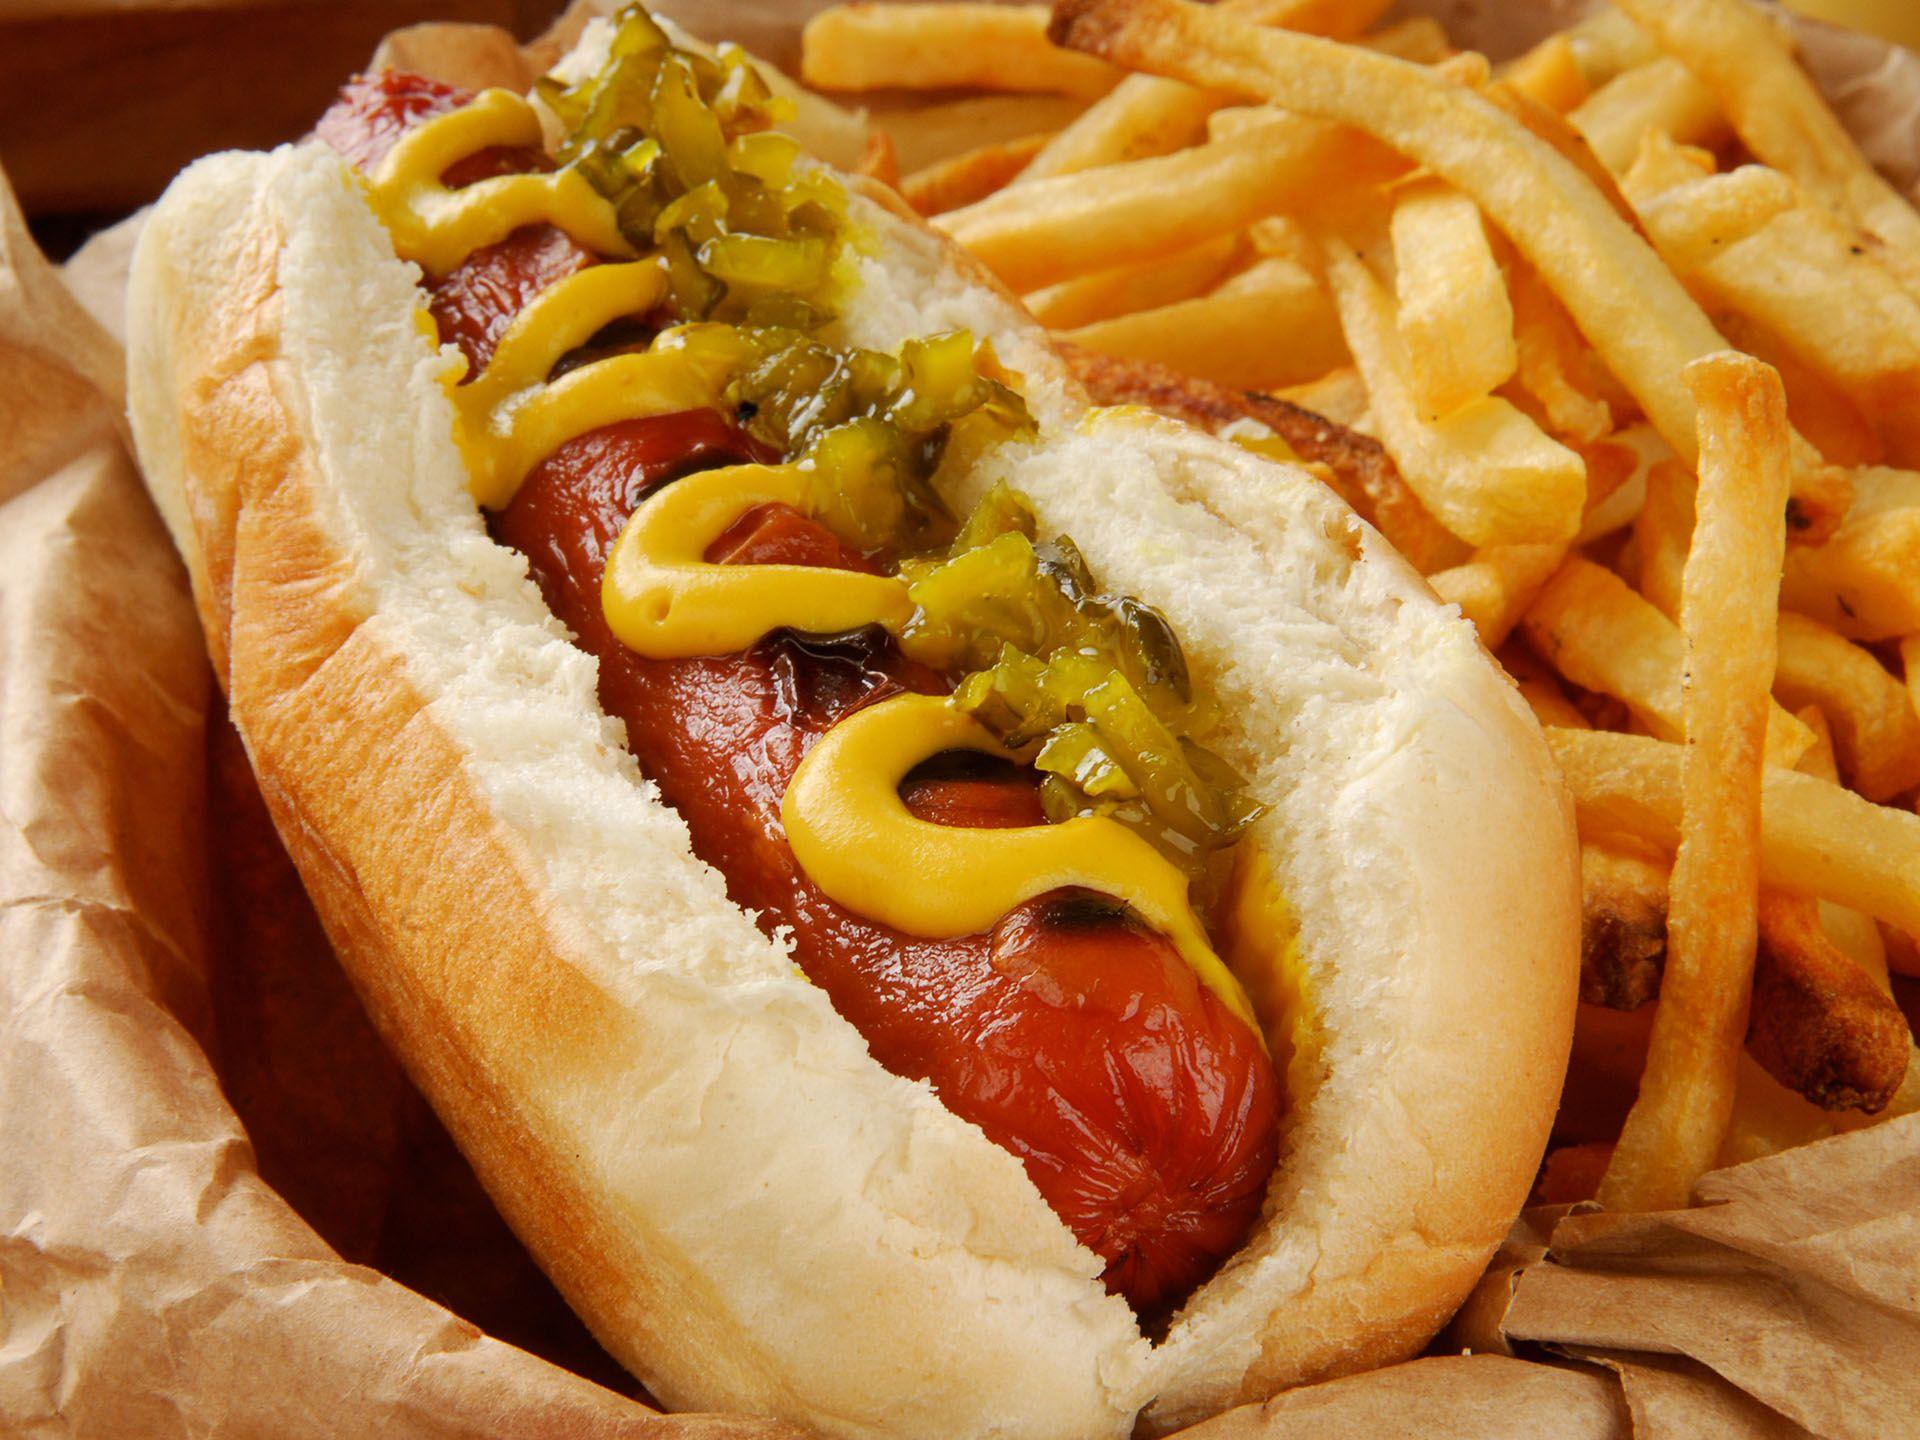 Pics Of Hot Dogs